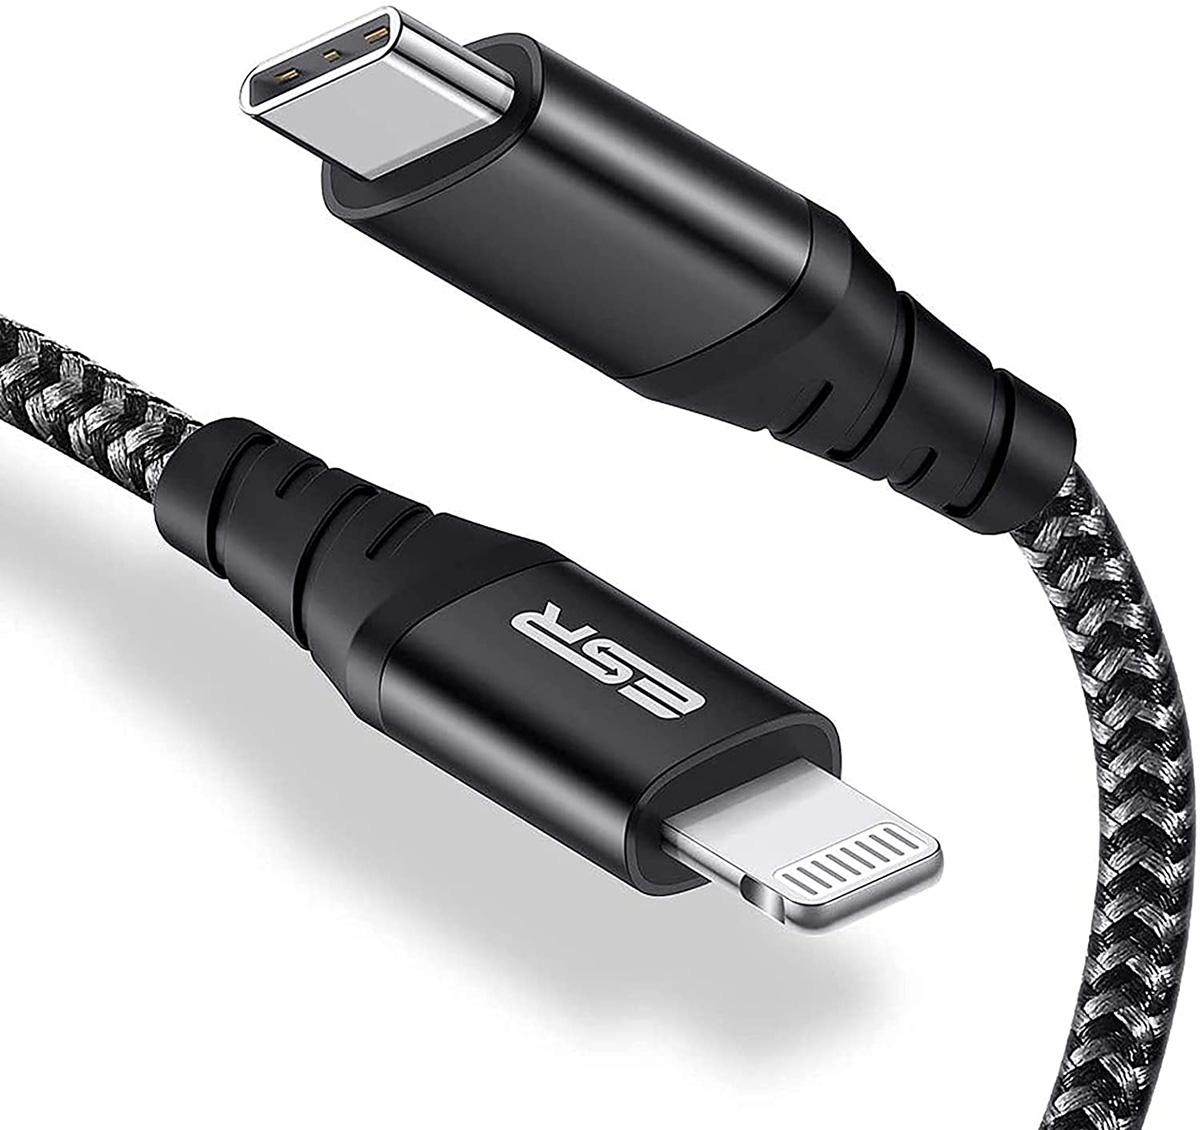 10ft ESR USB C to Apple iPhone Lightning Cable for $8.40